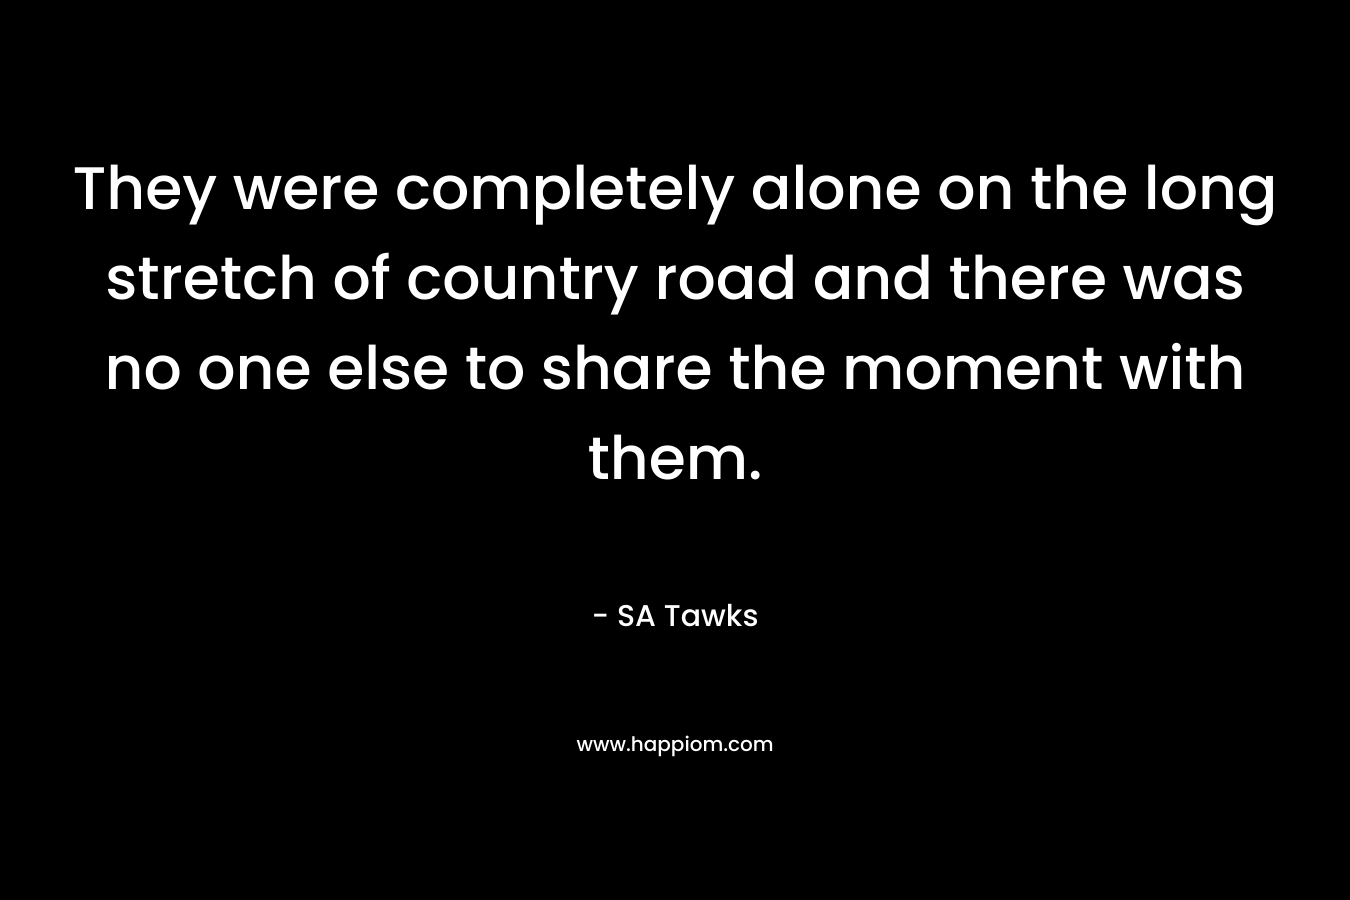 They were completely alone on the long stretch of country road and there was no one else to share the moment with them. – SA Tawks